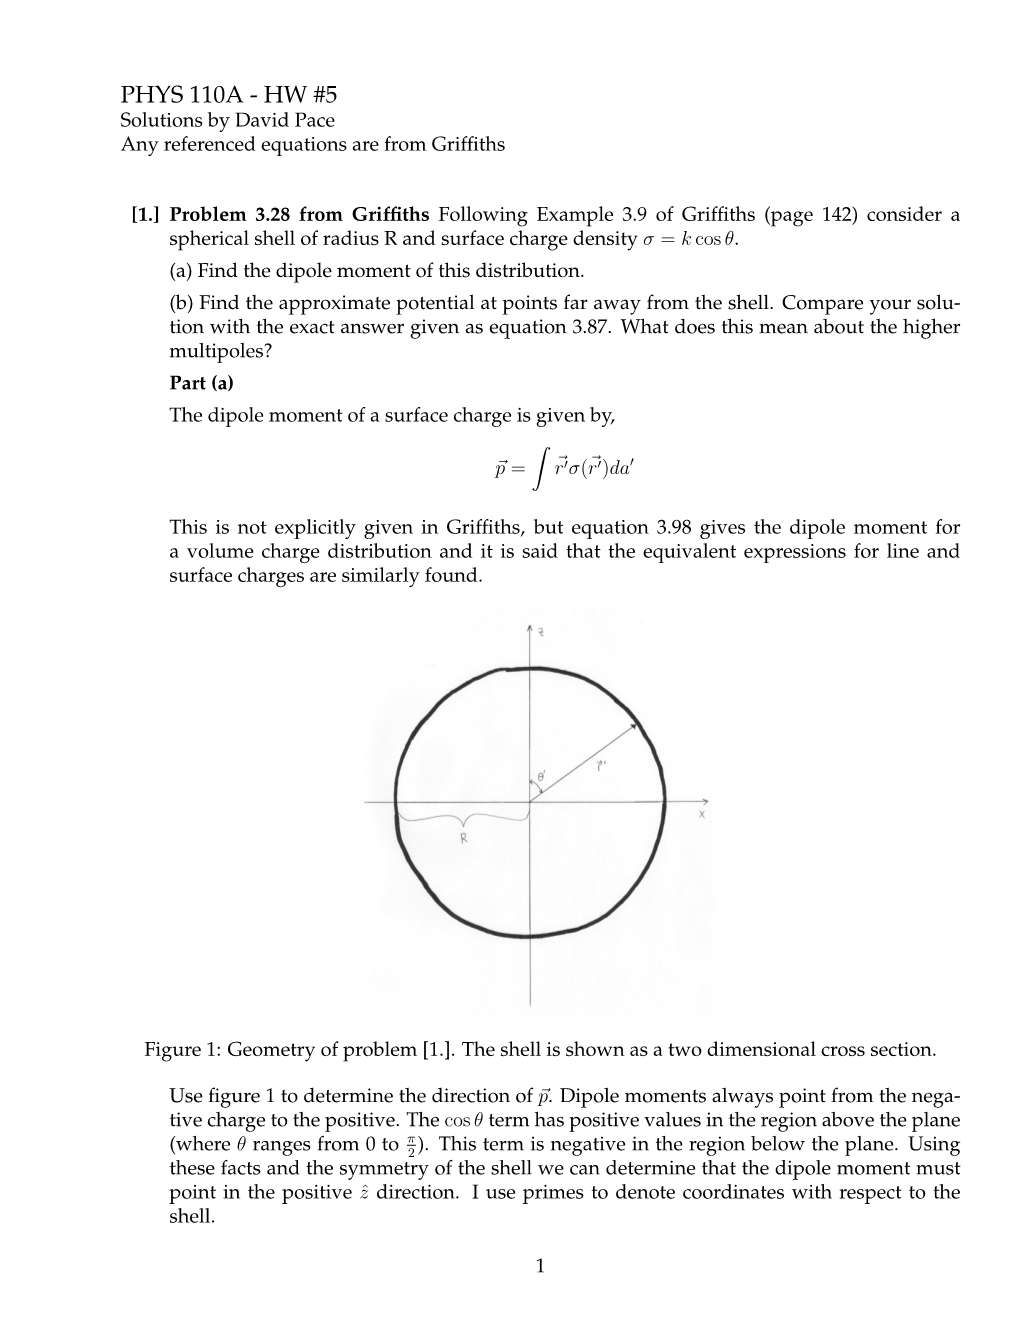 PHYS 110A - HW #5 Solutions by David Pace Any Referenced Equations Are from Grifﬁths